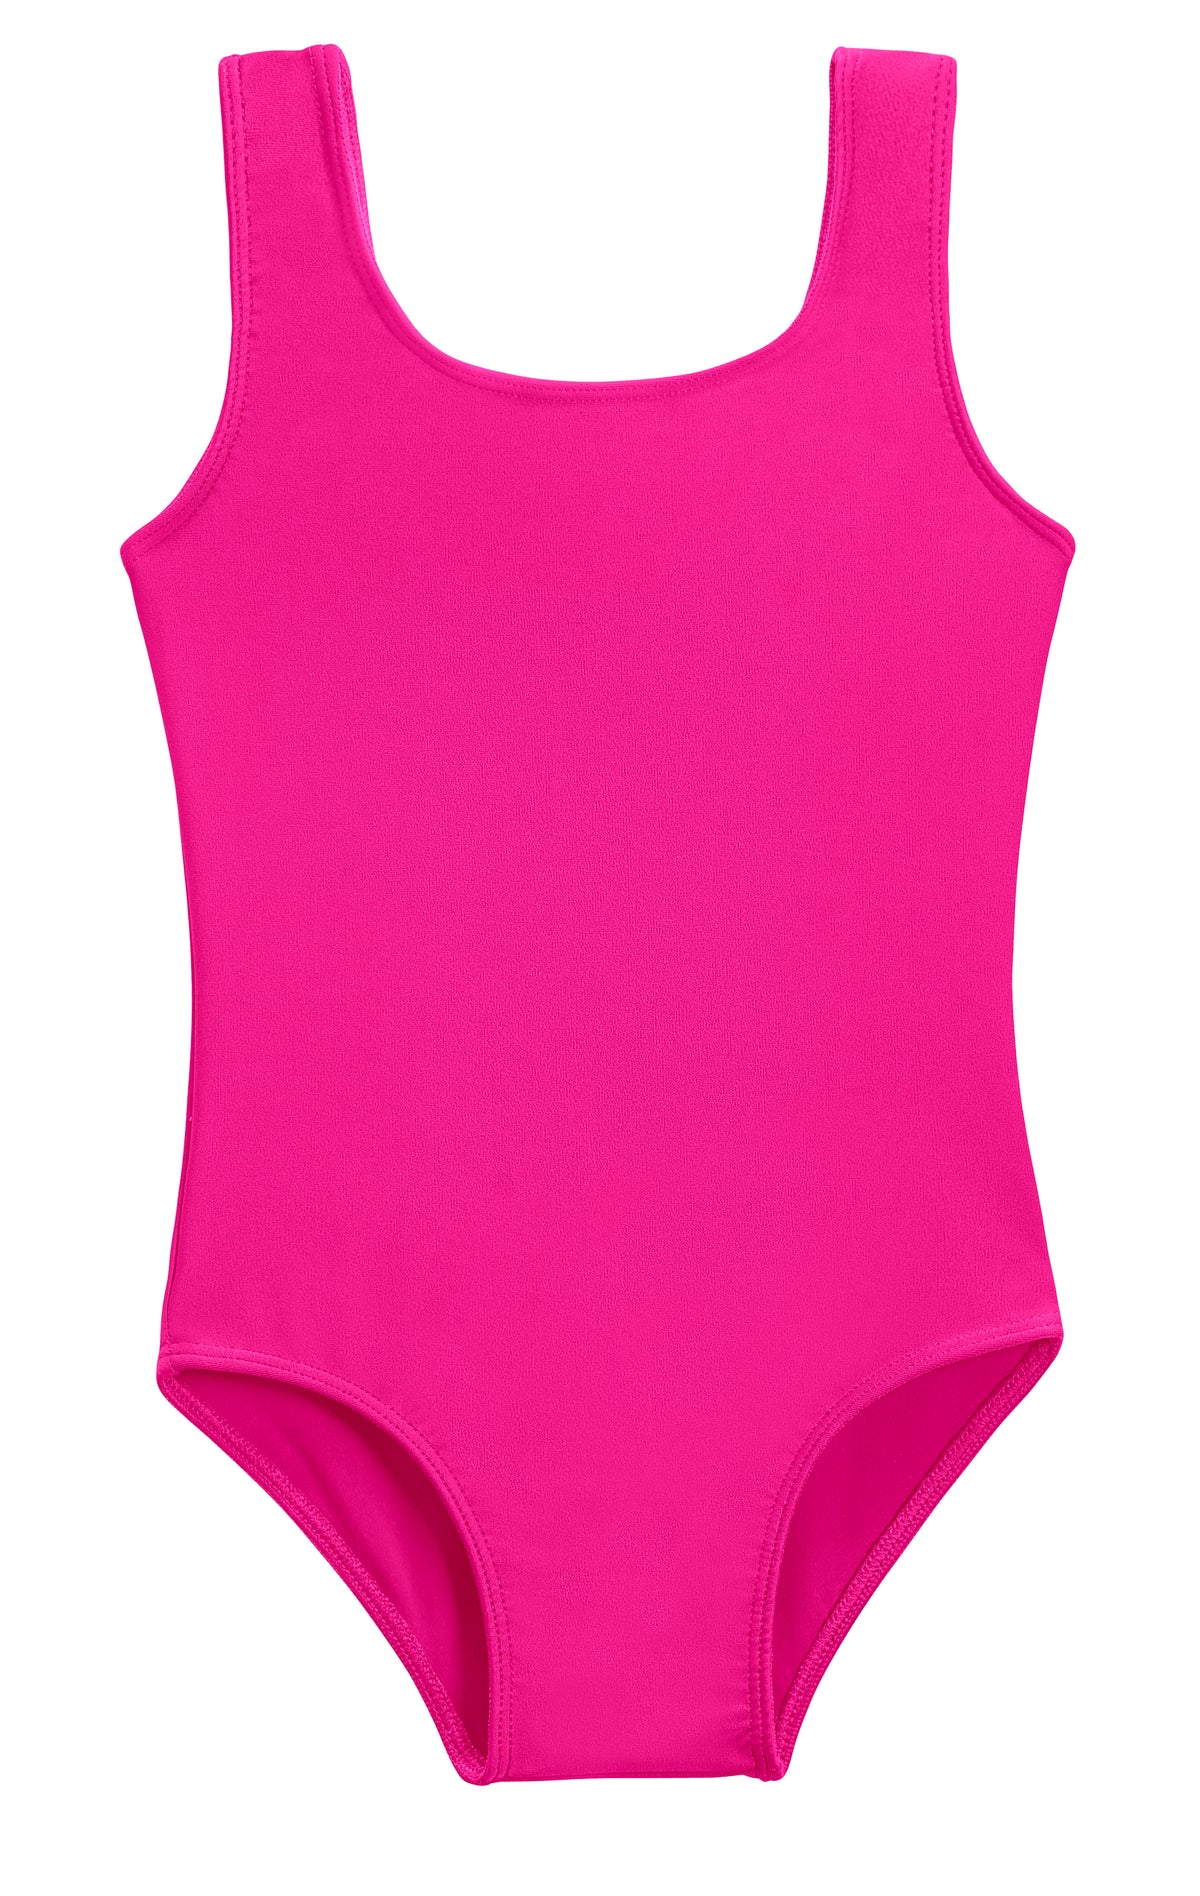 Girls Recycled Nylon UPF 50+ One Piece Swimsuit | Hot Pink